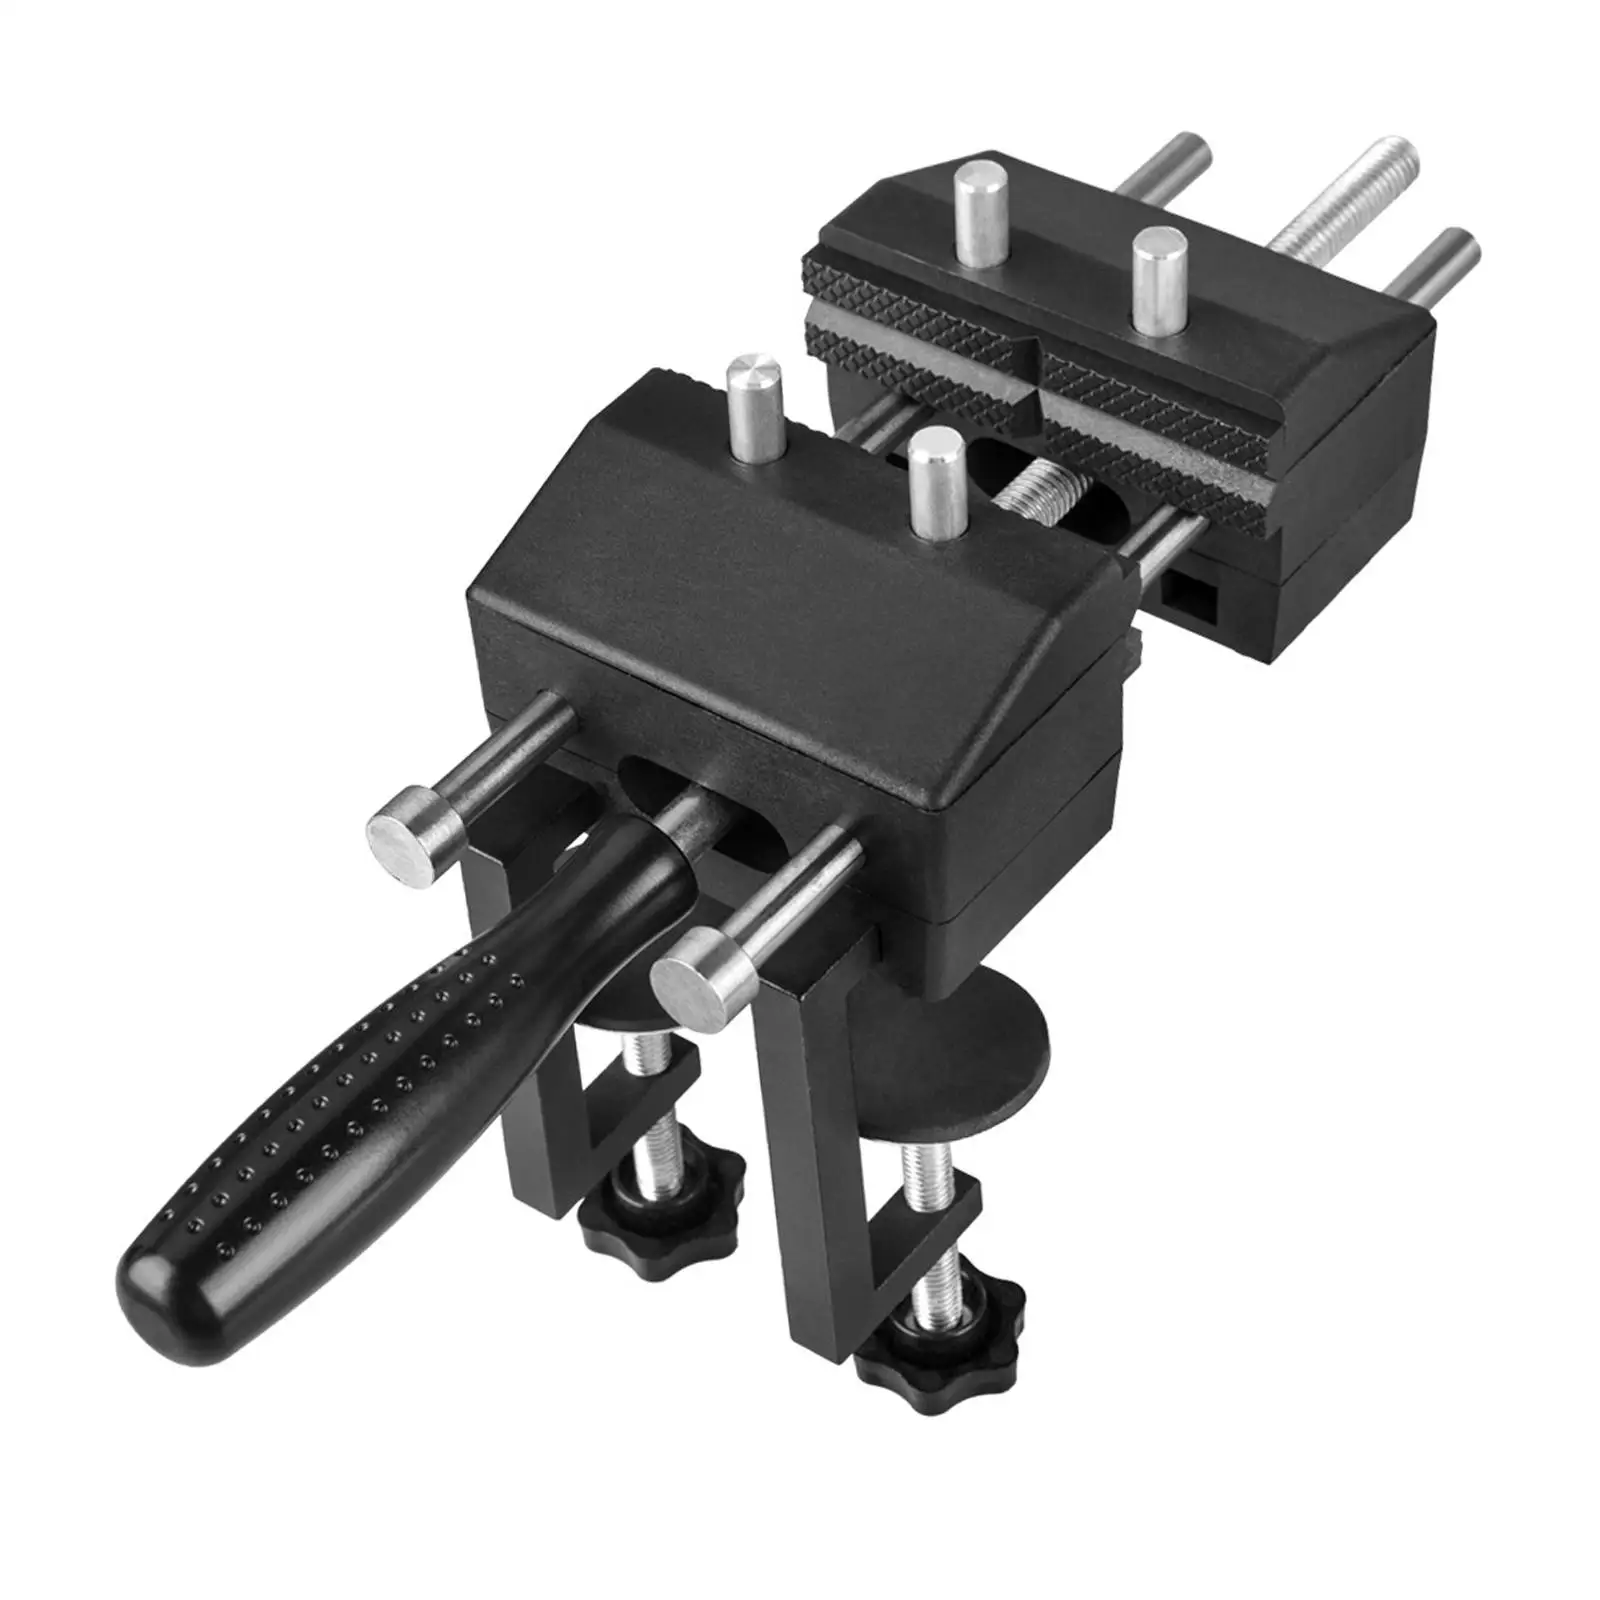 Table Vice Clamp Quick Adjustment with Swivel Bench Vise Clamp for Woodworking Drilling Sawing Workbench Accessories